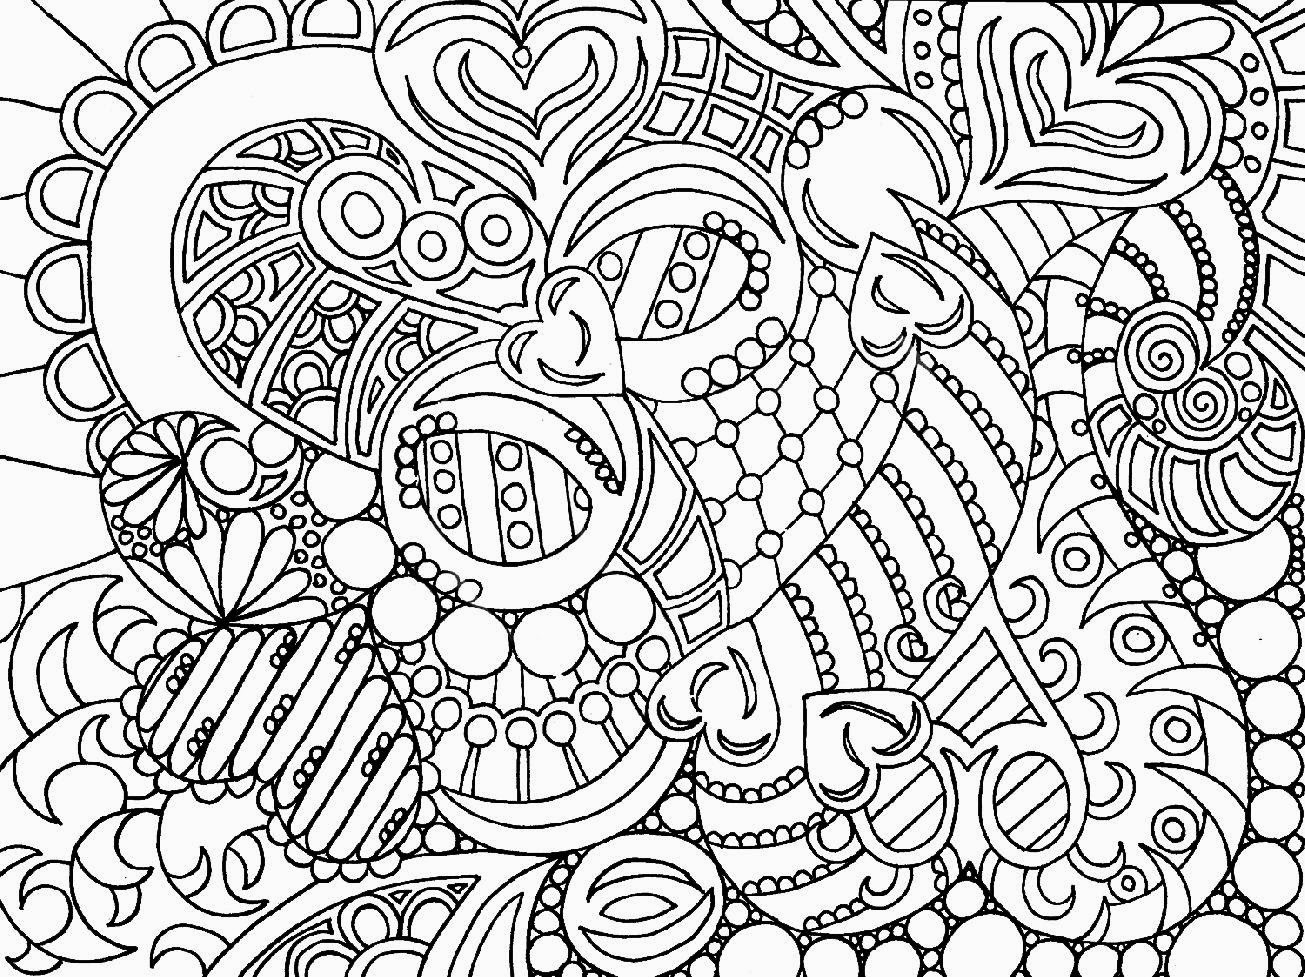 Adult Coloring Sheets Free Coloring Sheet Effy Moom Free Coloring Picture wallpaper give a chance to color on the wall without getting in trouble! Fill the walls of your home or office with stress-relieving [effymoom.blogspot.com]